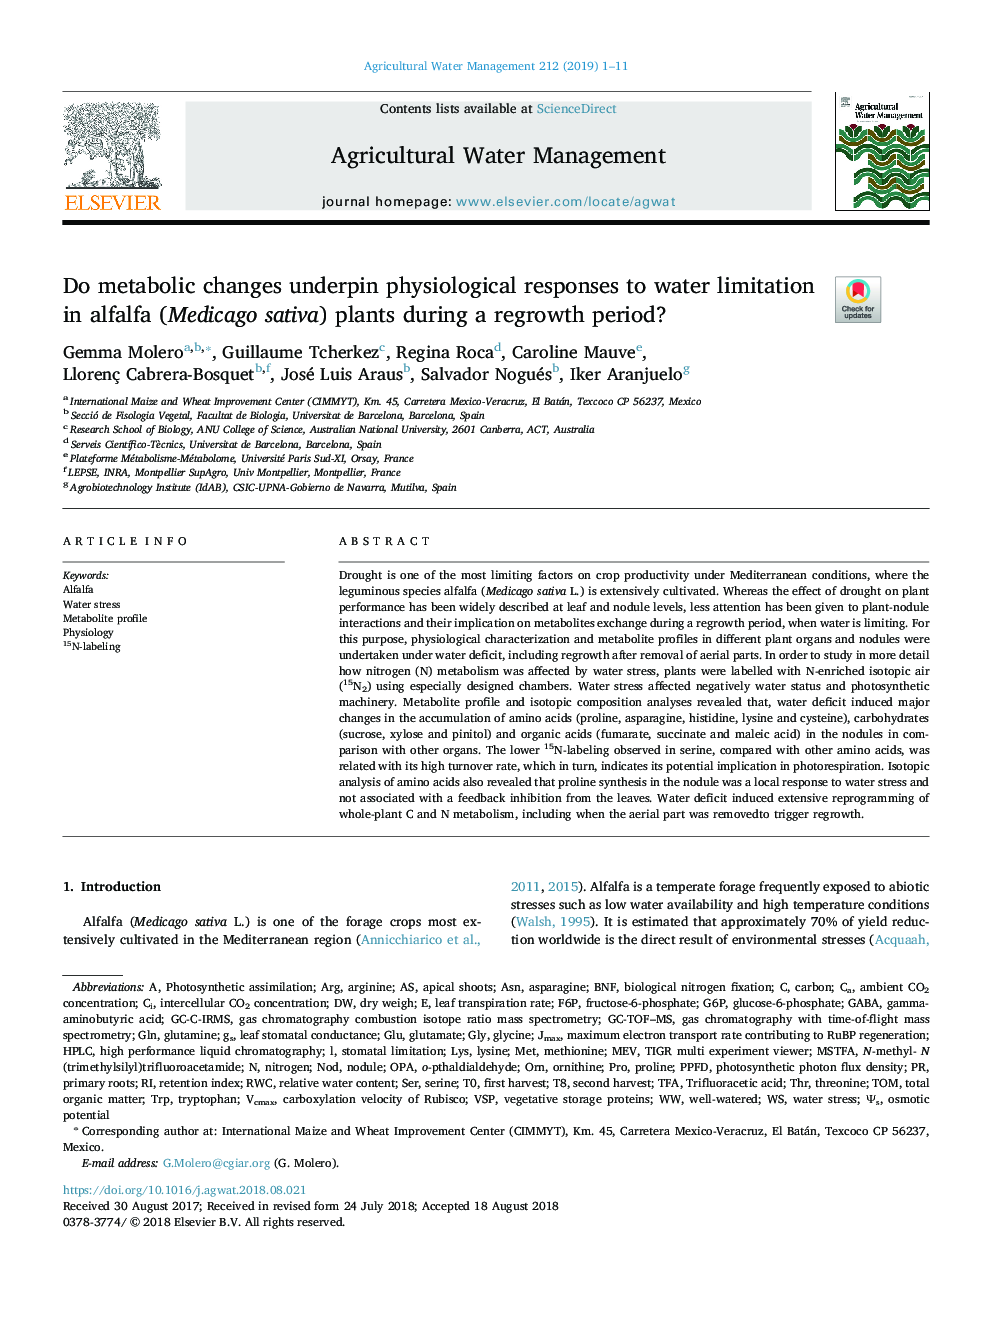 Do metabolic changes underpin physiological responses to water limitation in alfalfa (Medicago sativa) plants during a regrowth period?